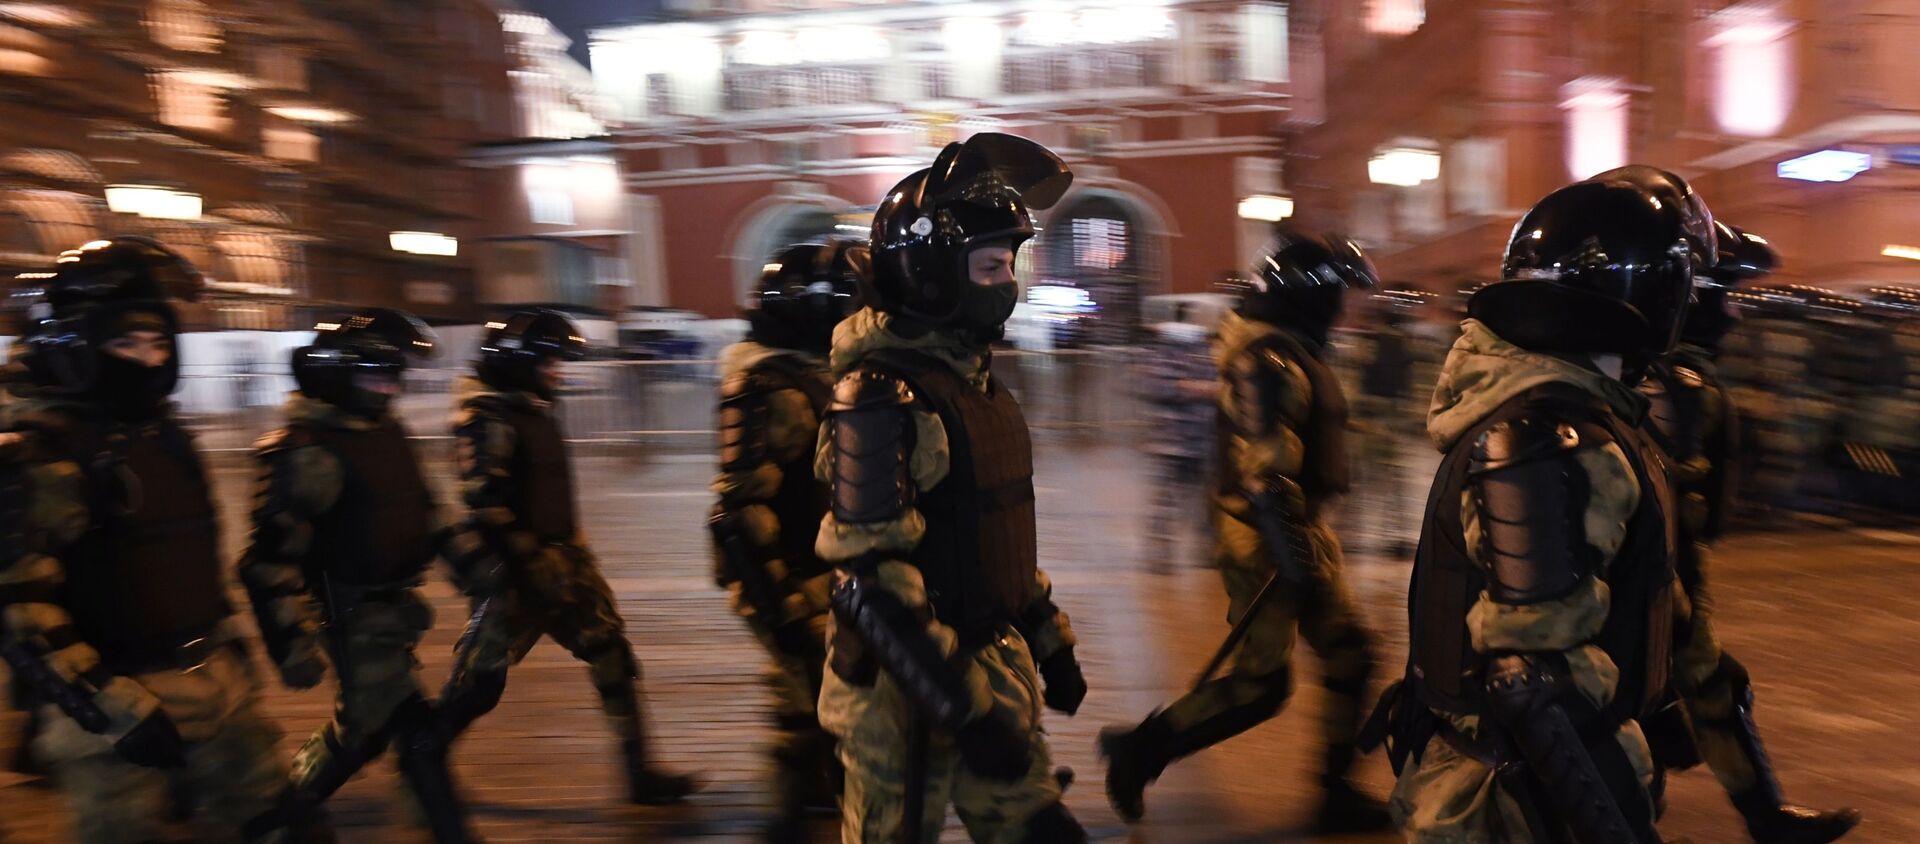 Law enforcement forces seen ahead of an unauthorised rally in Moscow - Sputnik International, 1920, 05.02.2021